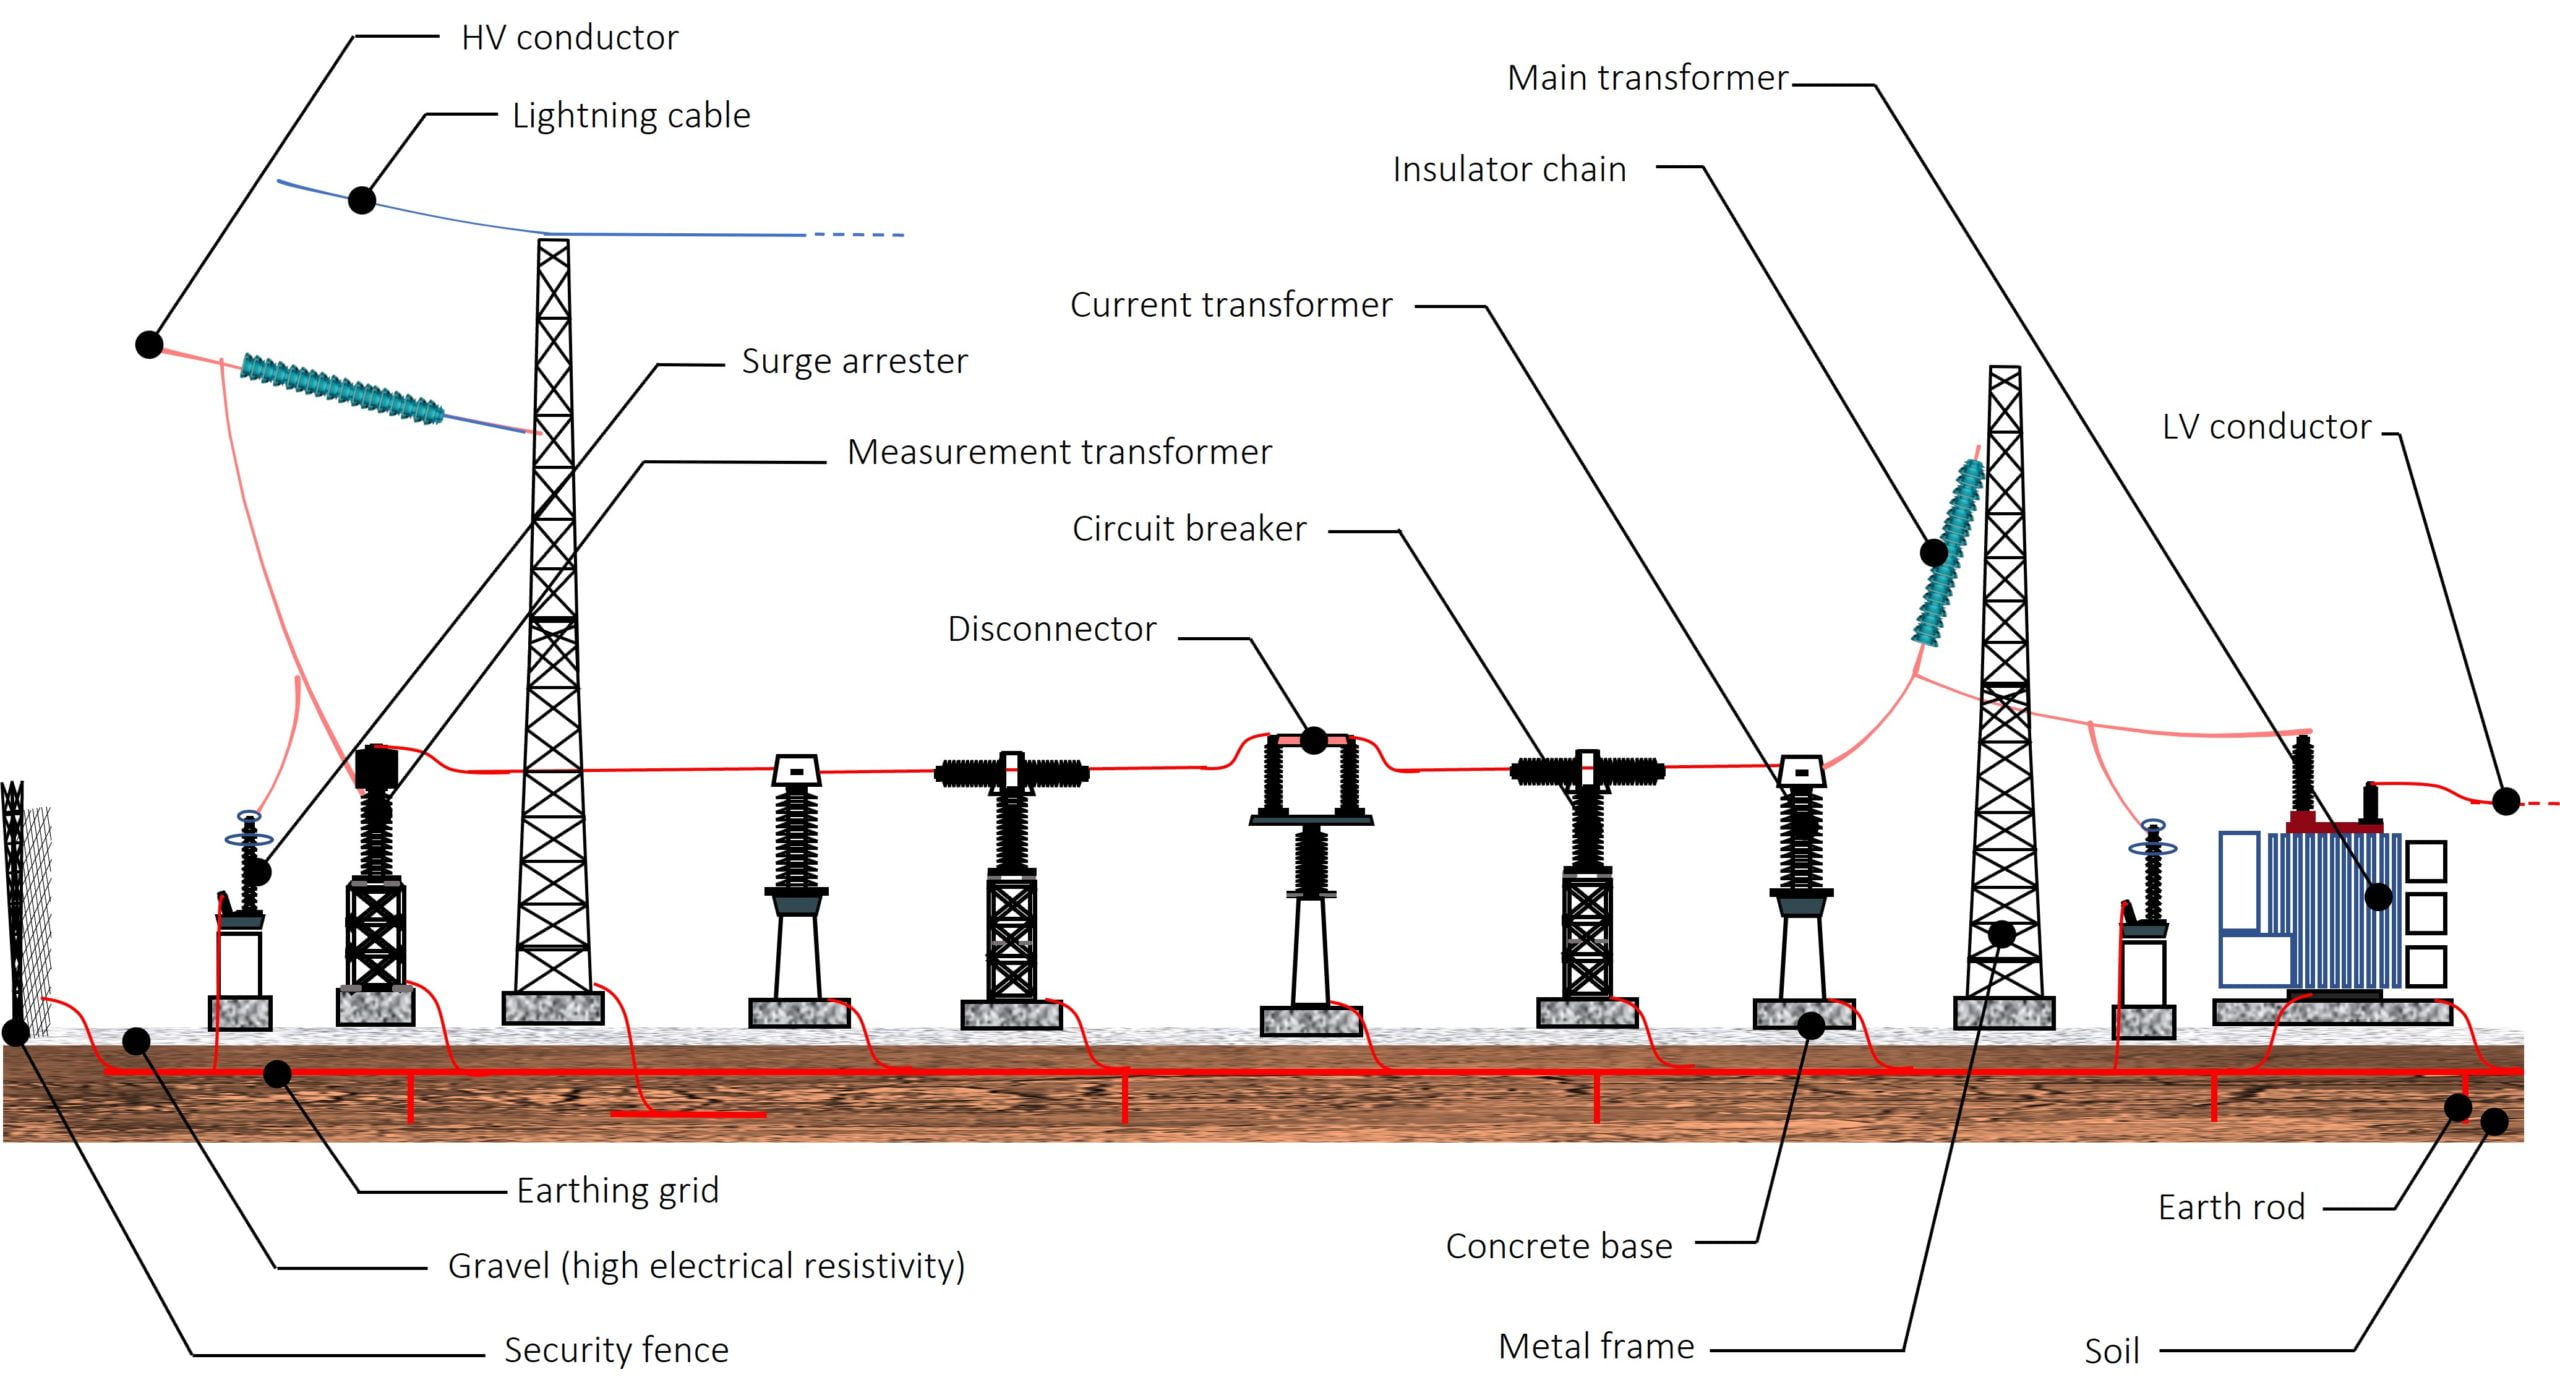 Representation of Typical Electrical Substation (not real)